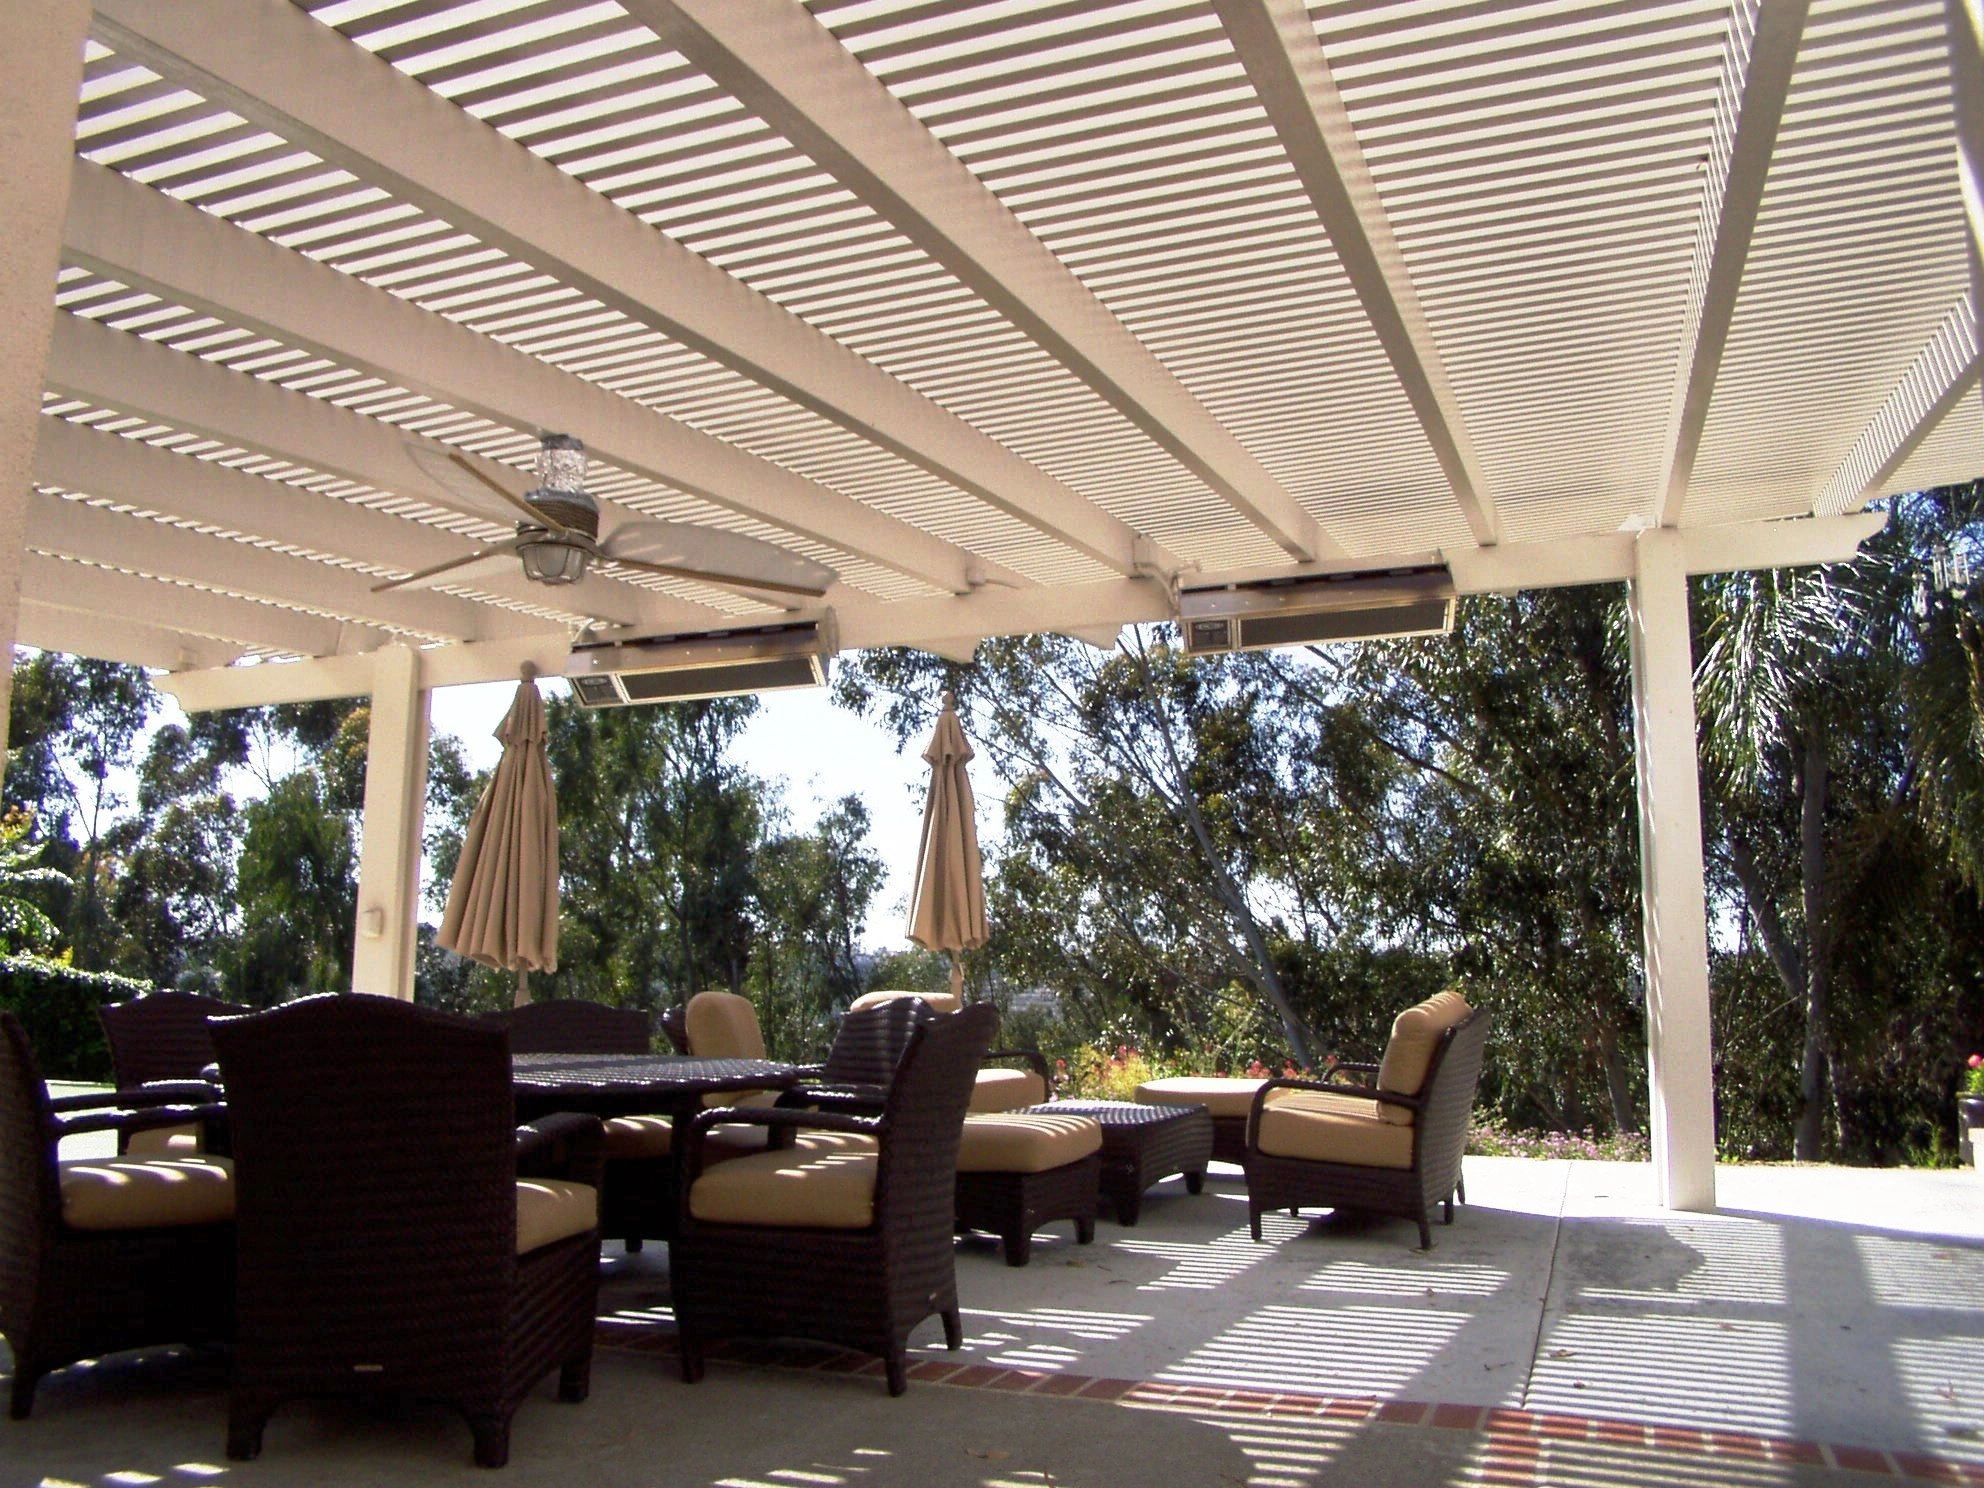 Where your Patio Cover dreams become reality!